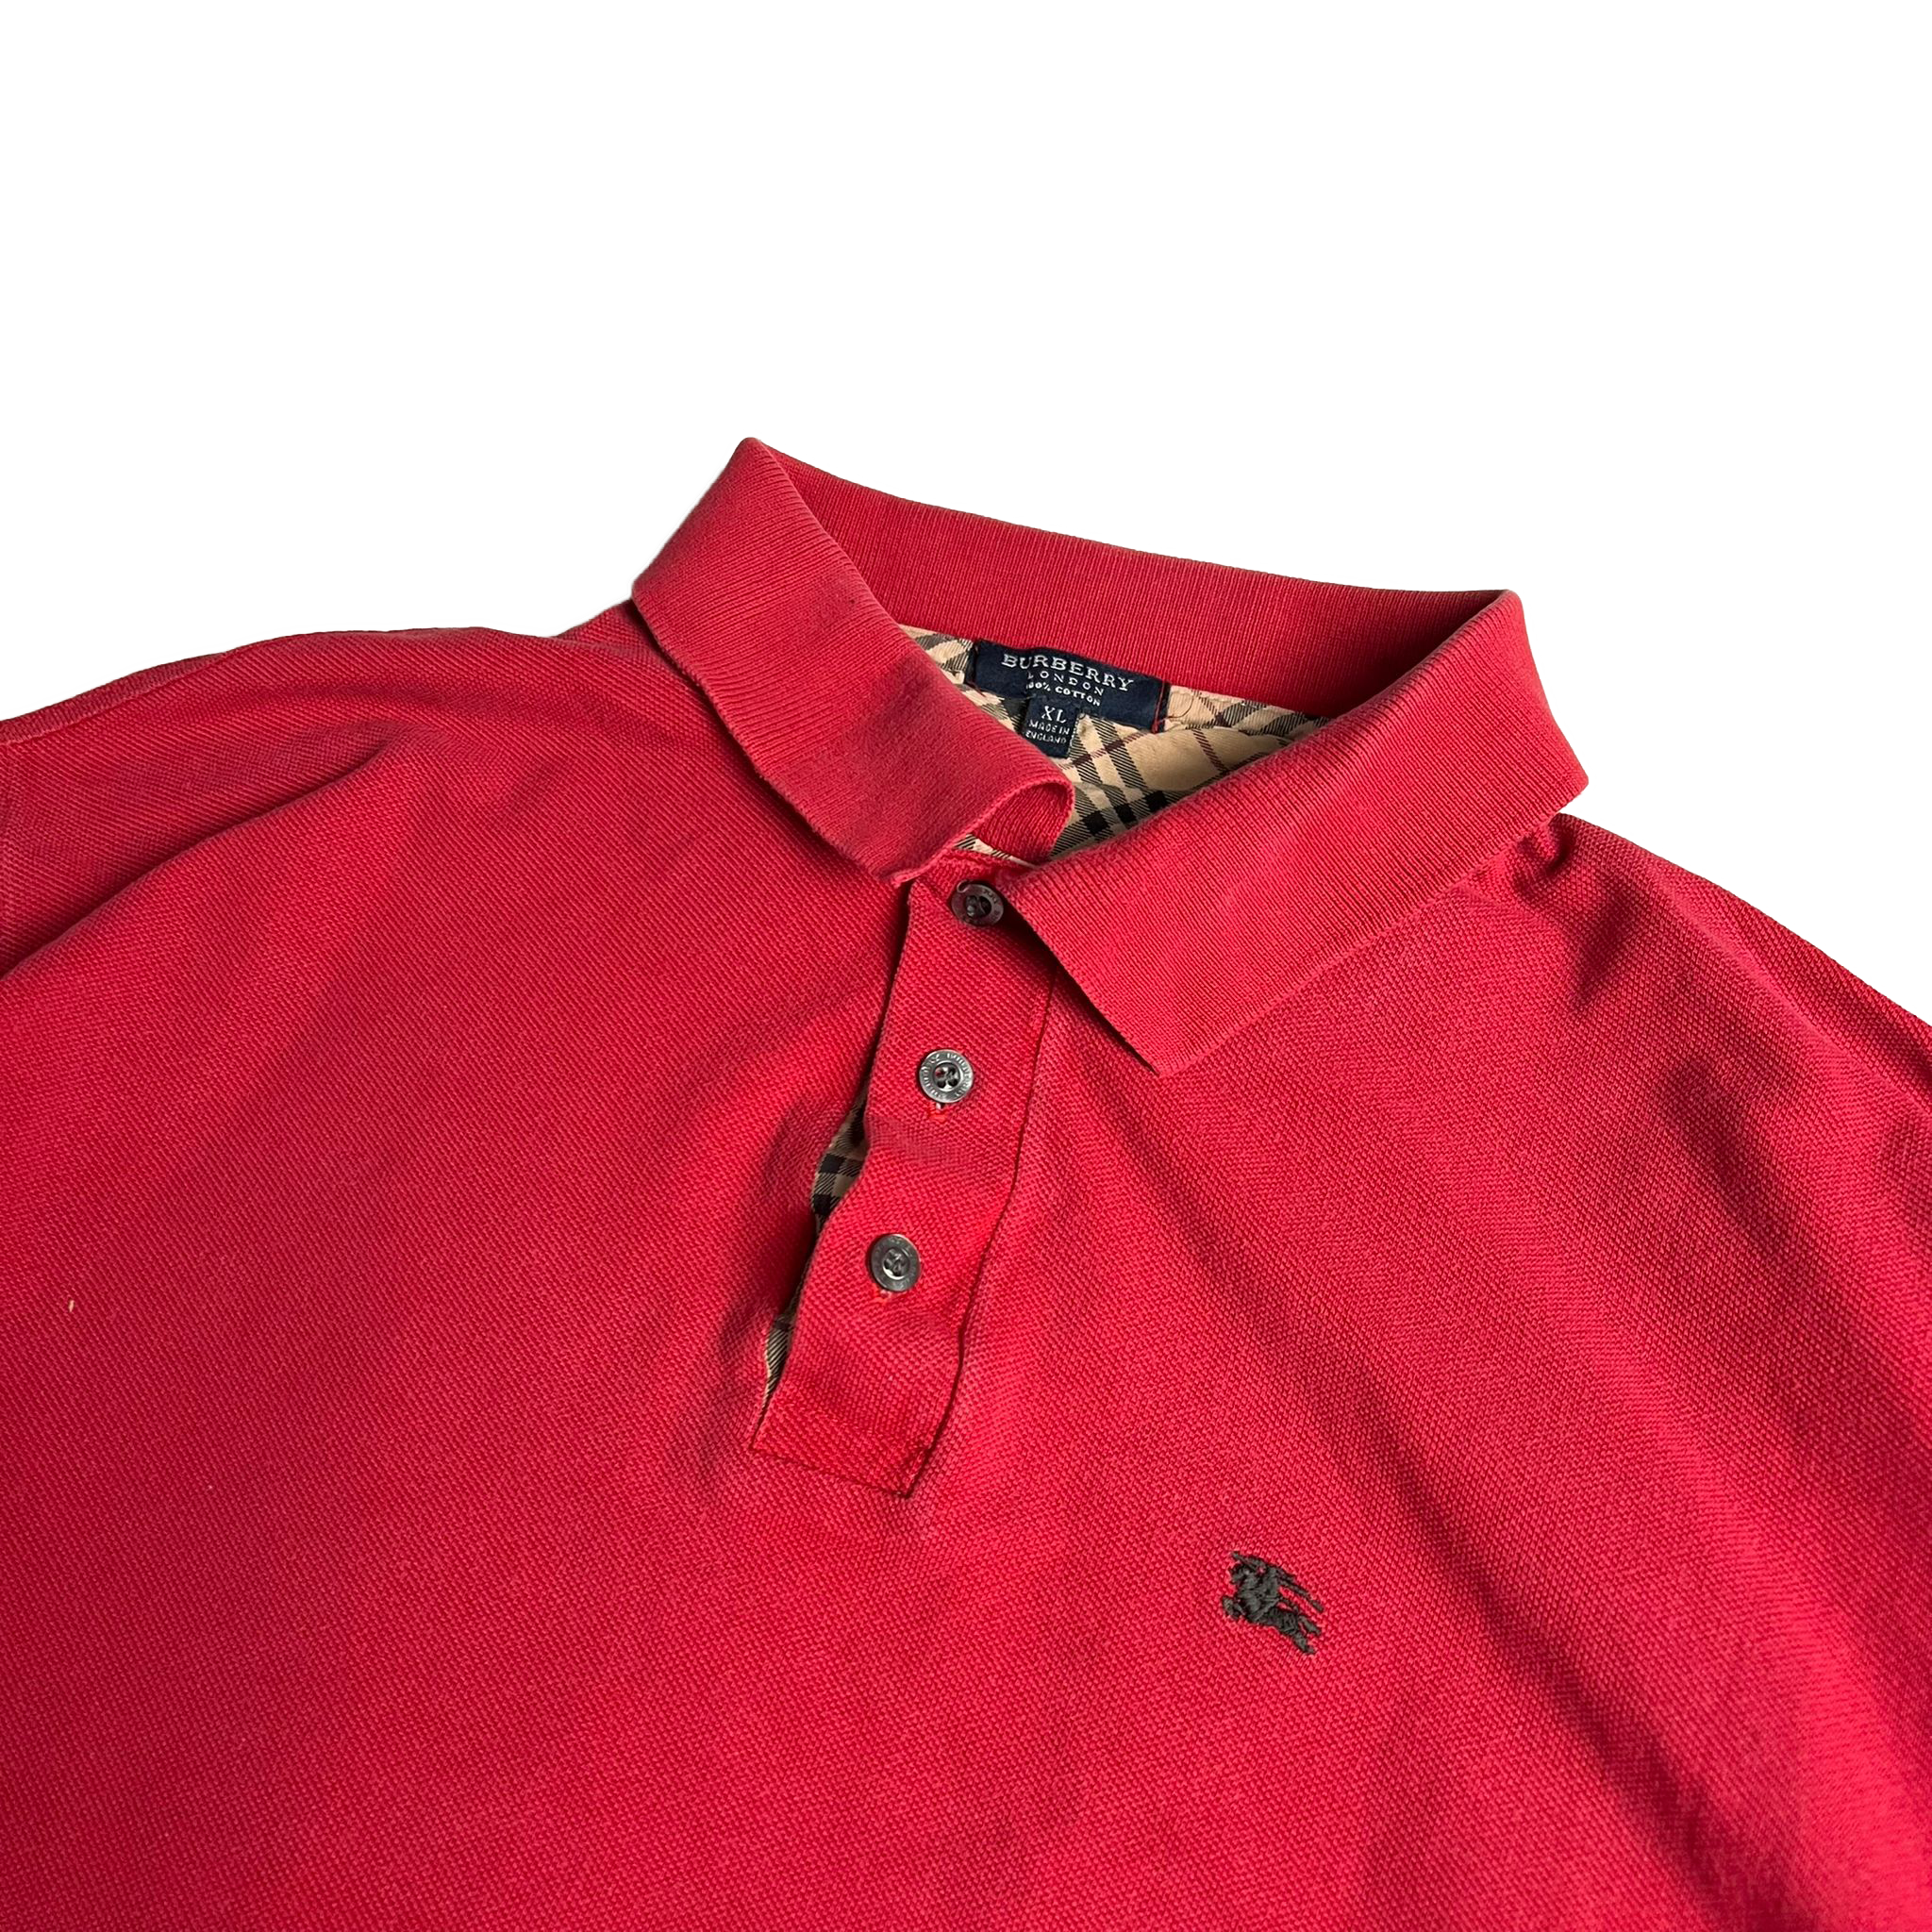 90's Burberry rugby shirt